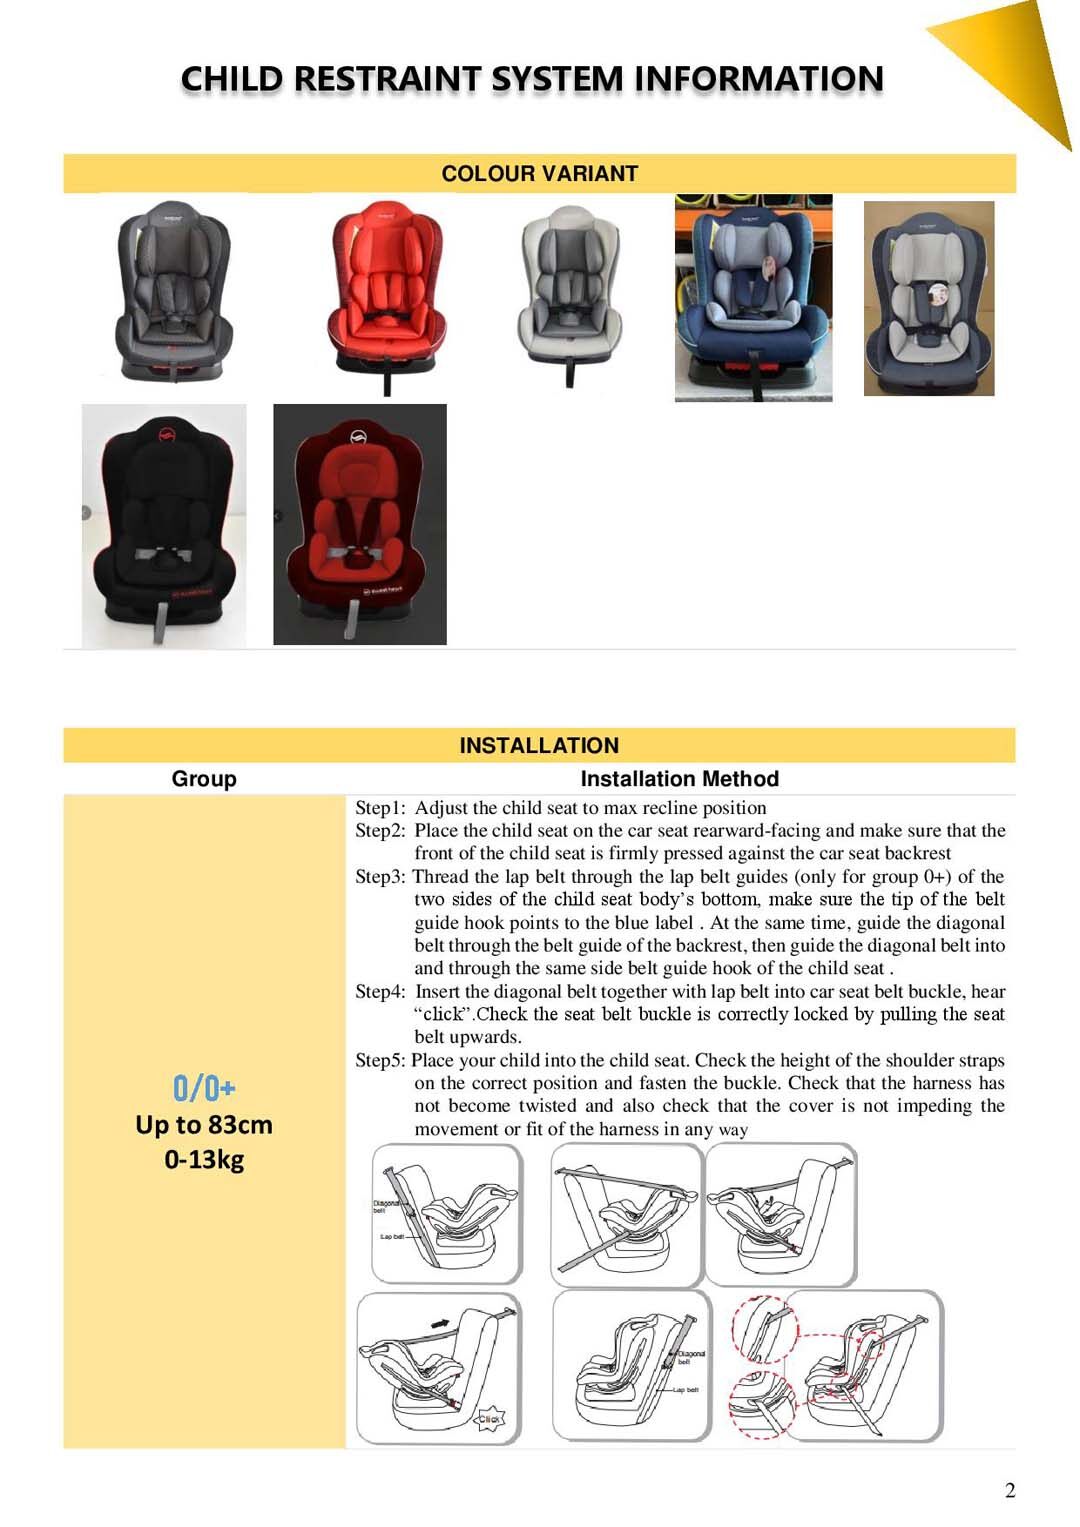 Sweet Heart Paris CS226 Group 01 Baby Car Seat Assurance JPJ Approved MIROS and ECE R44/04 Certified (Black Grey)